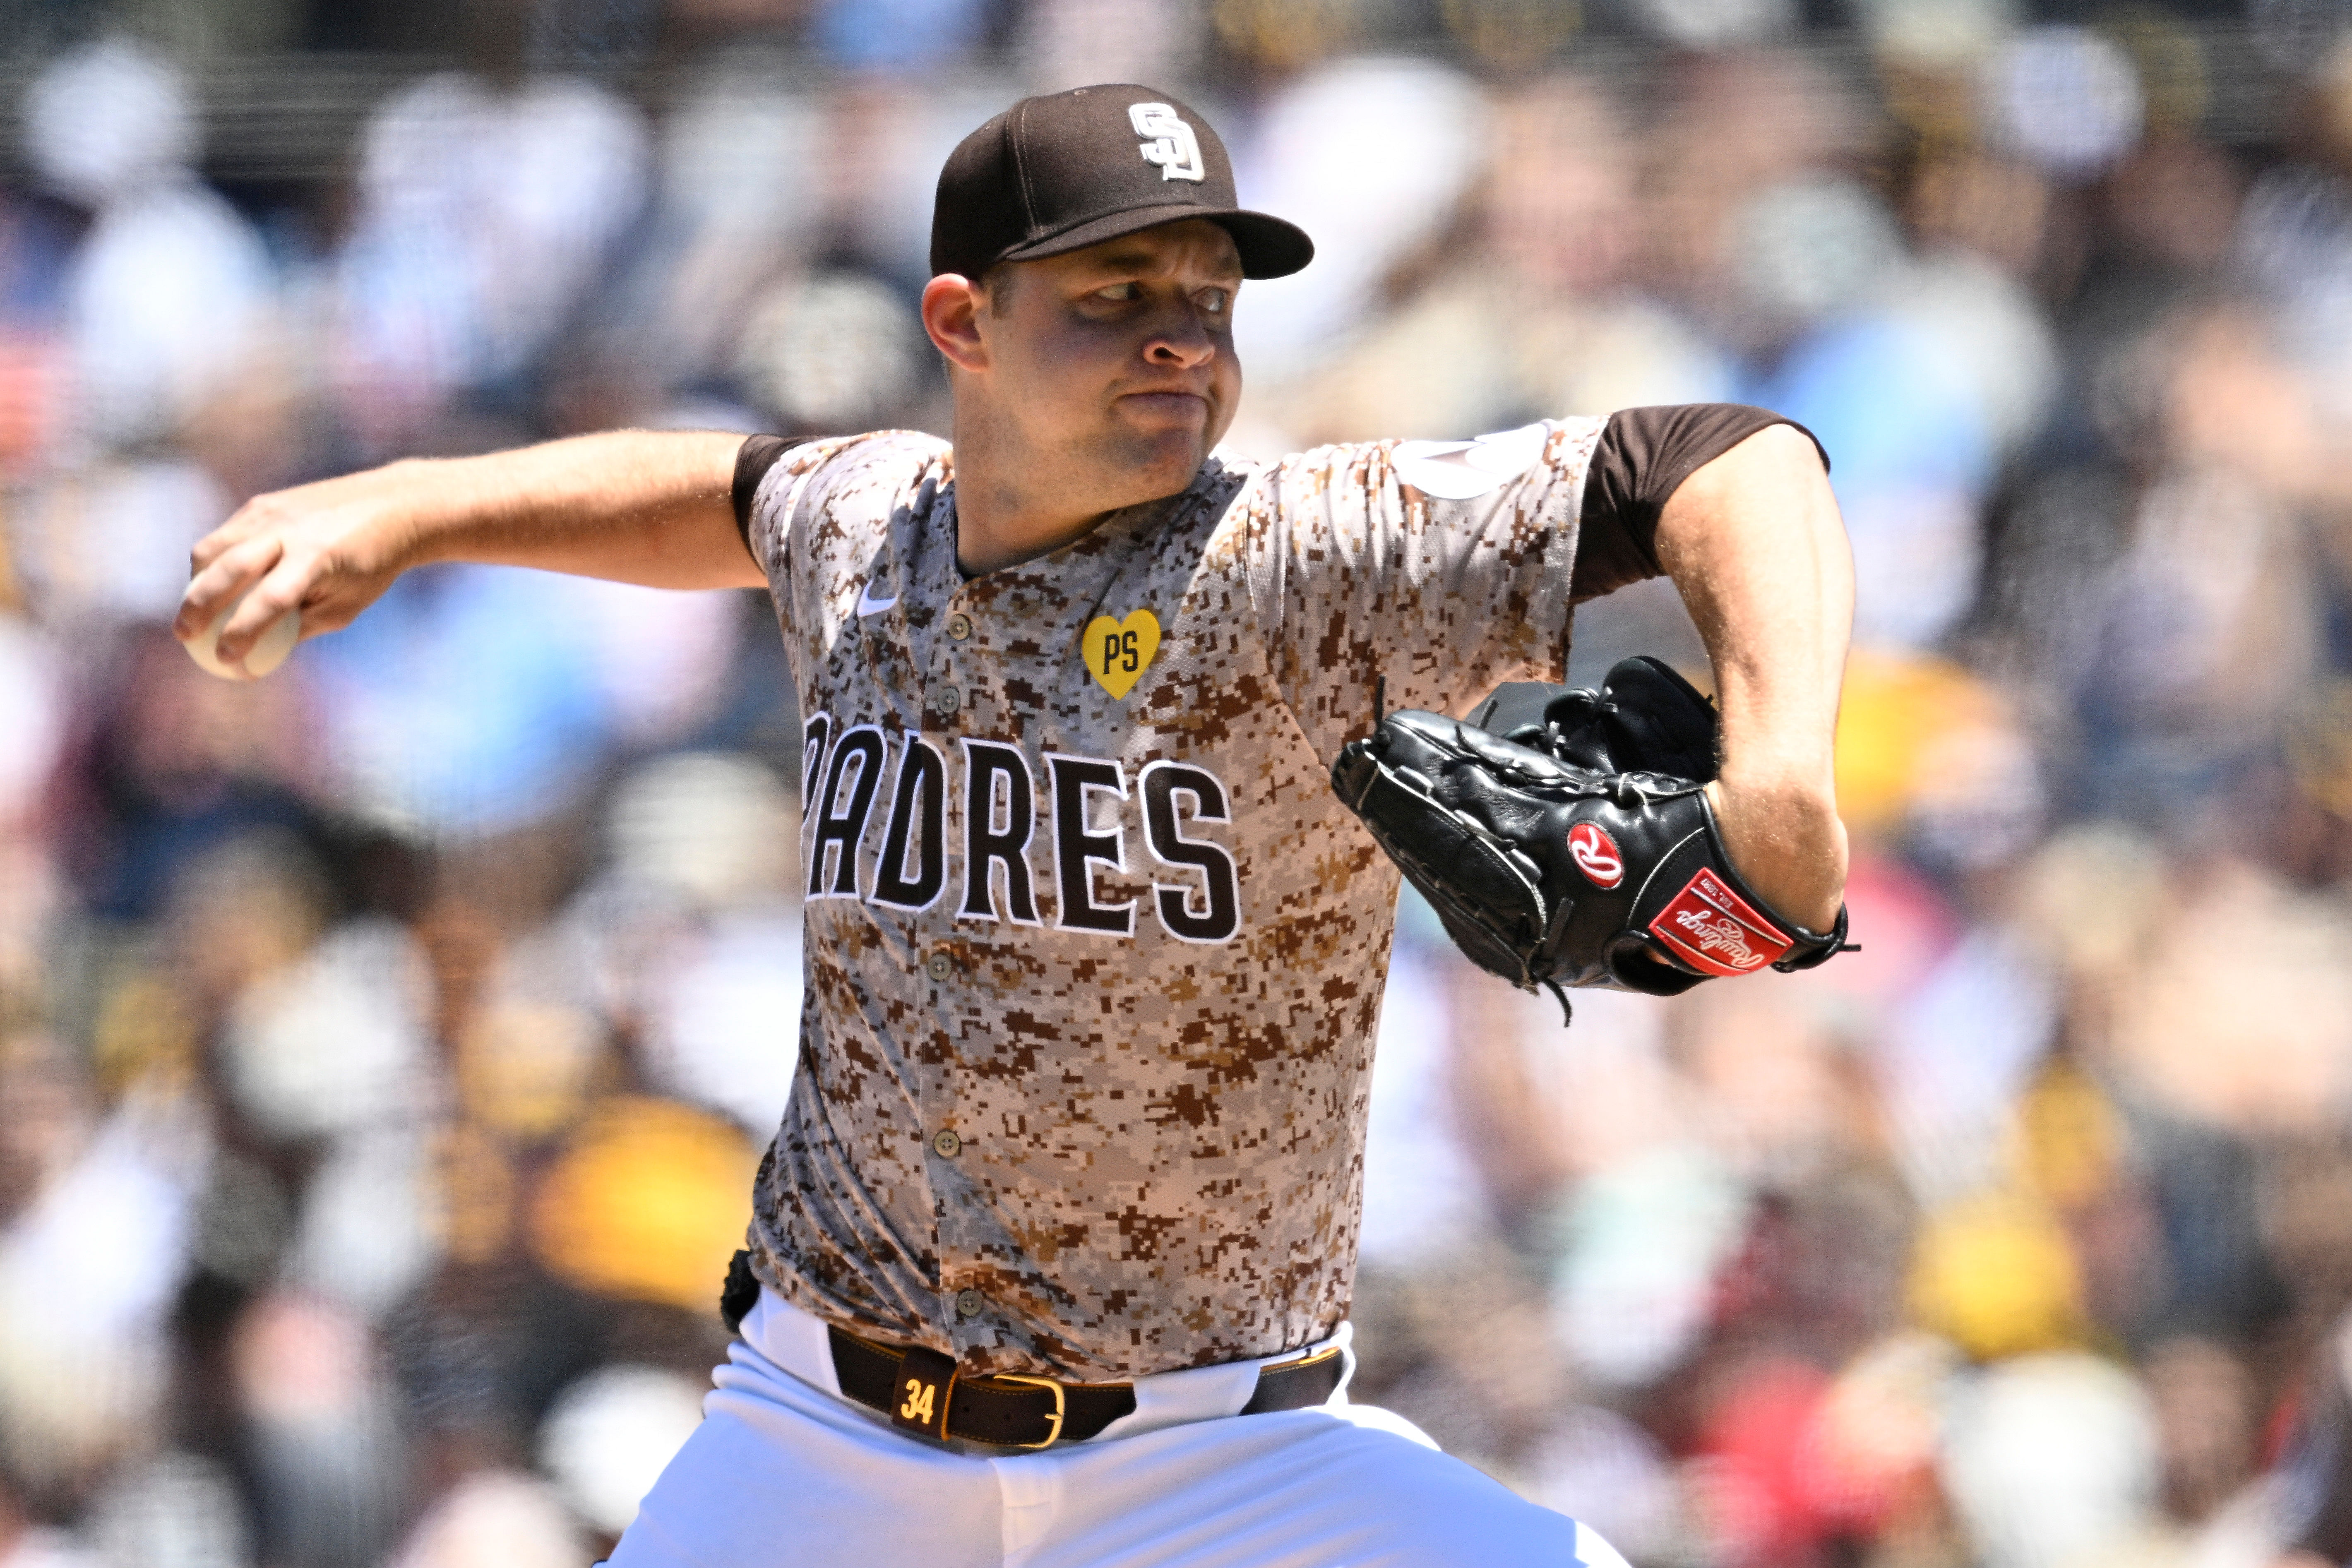 Michael King will pitch against the Dodgers